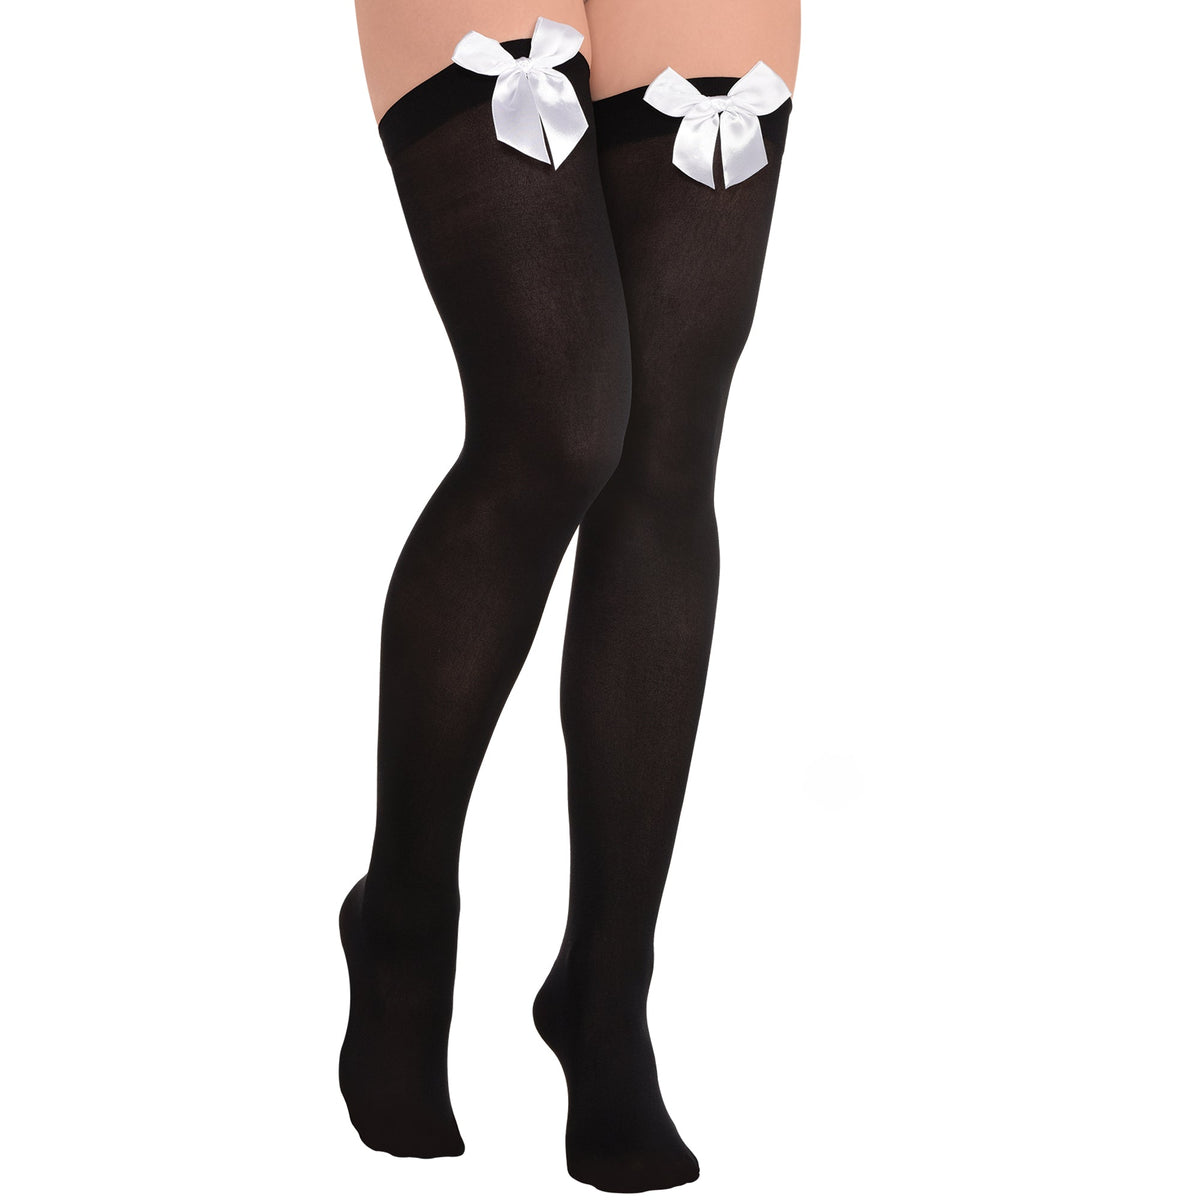 SUIT YOURSELF COSTUME CO. Costume Accessories Black Thigh Highs with White Satin Bow for Adults 5744817751445